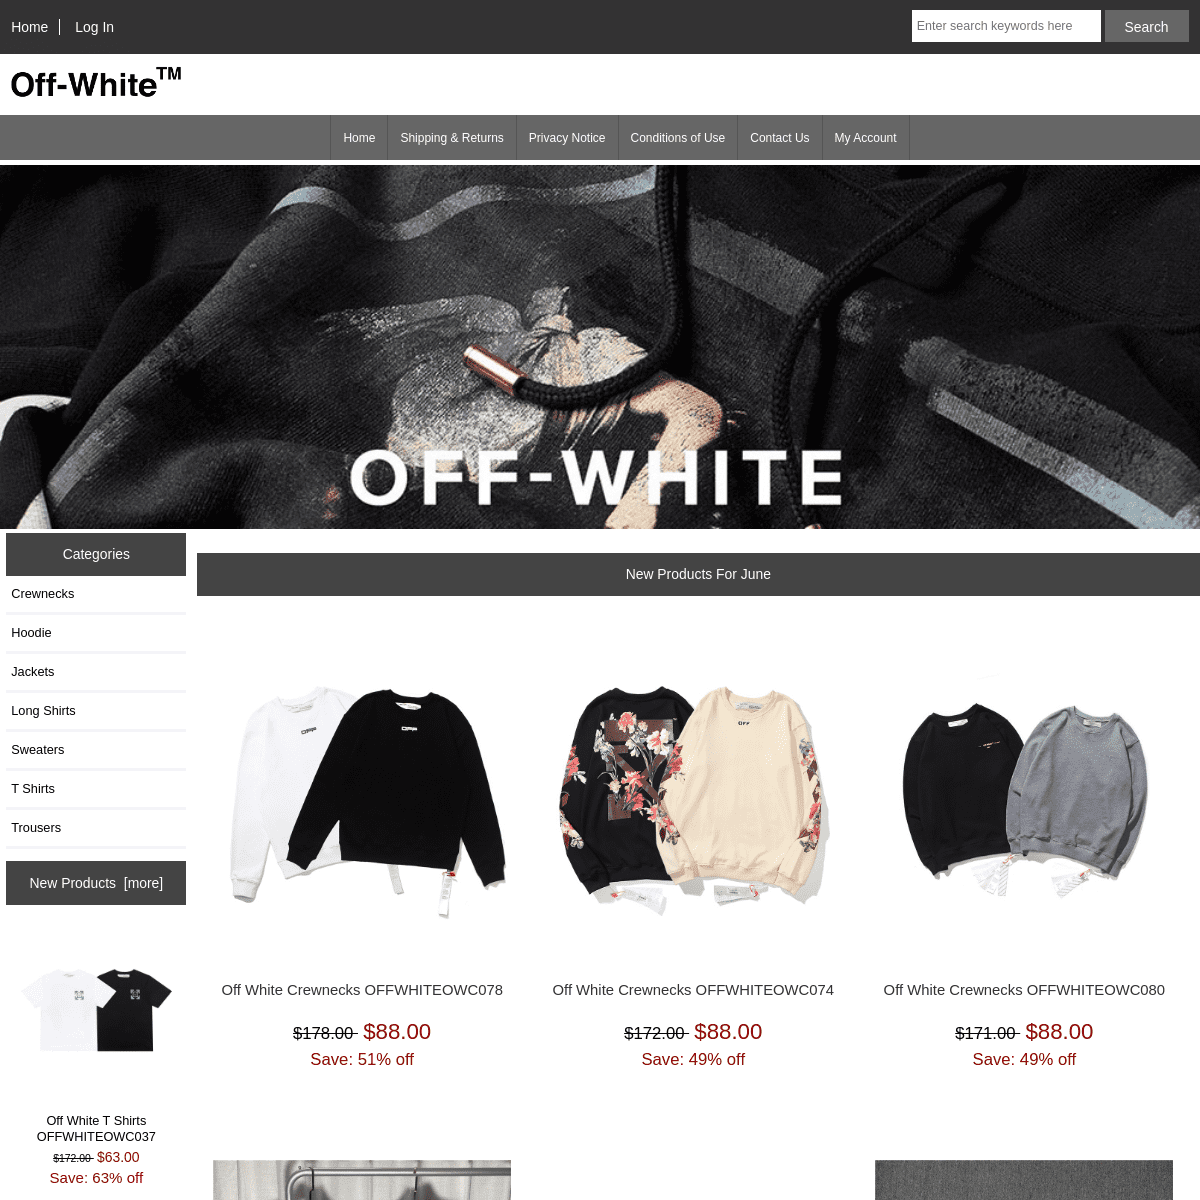 A complete backup of https://offwhiteclothes.com